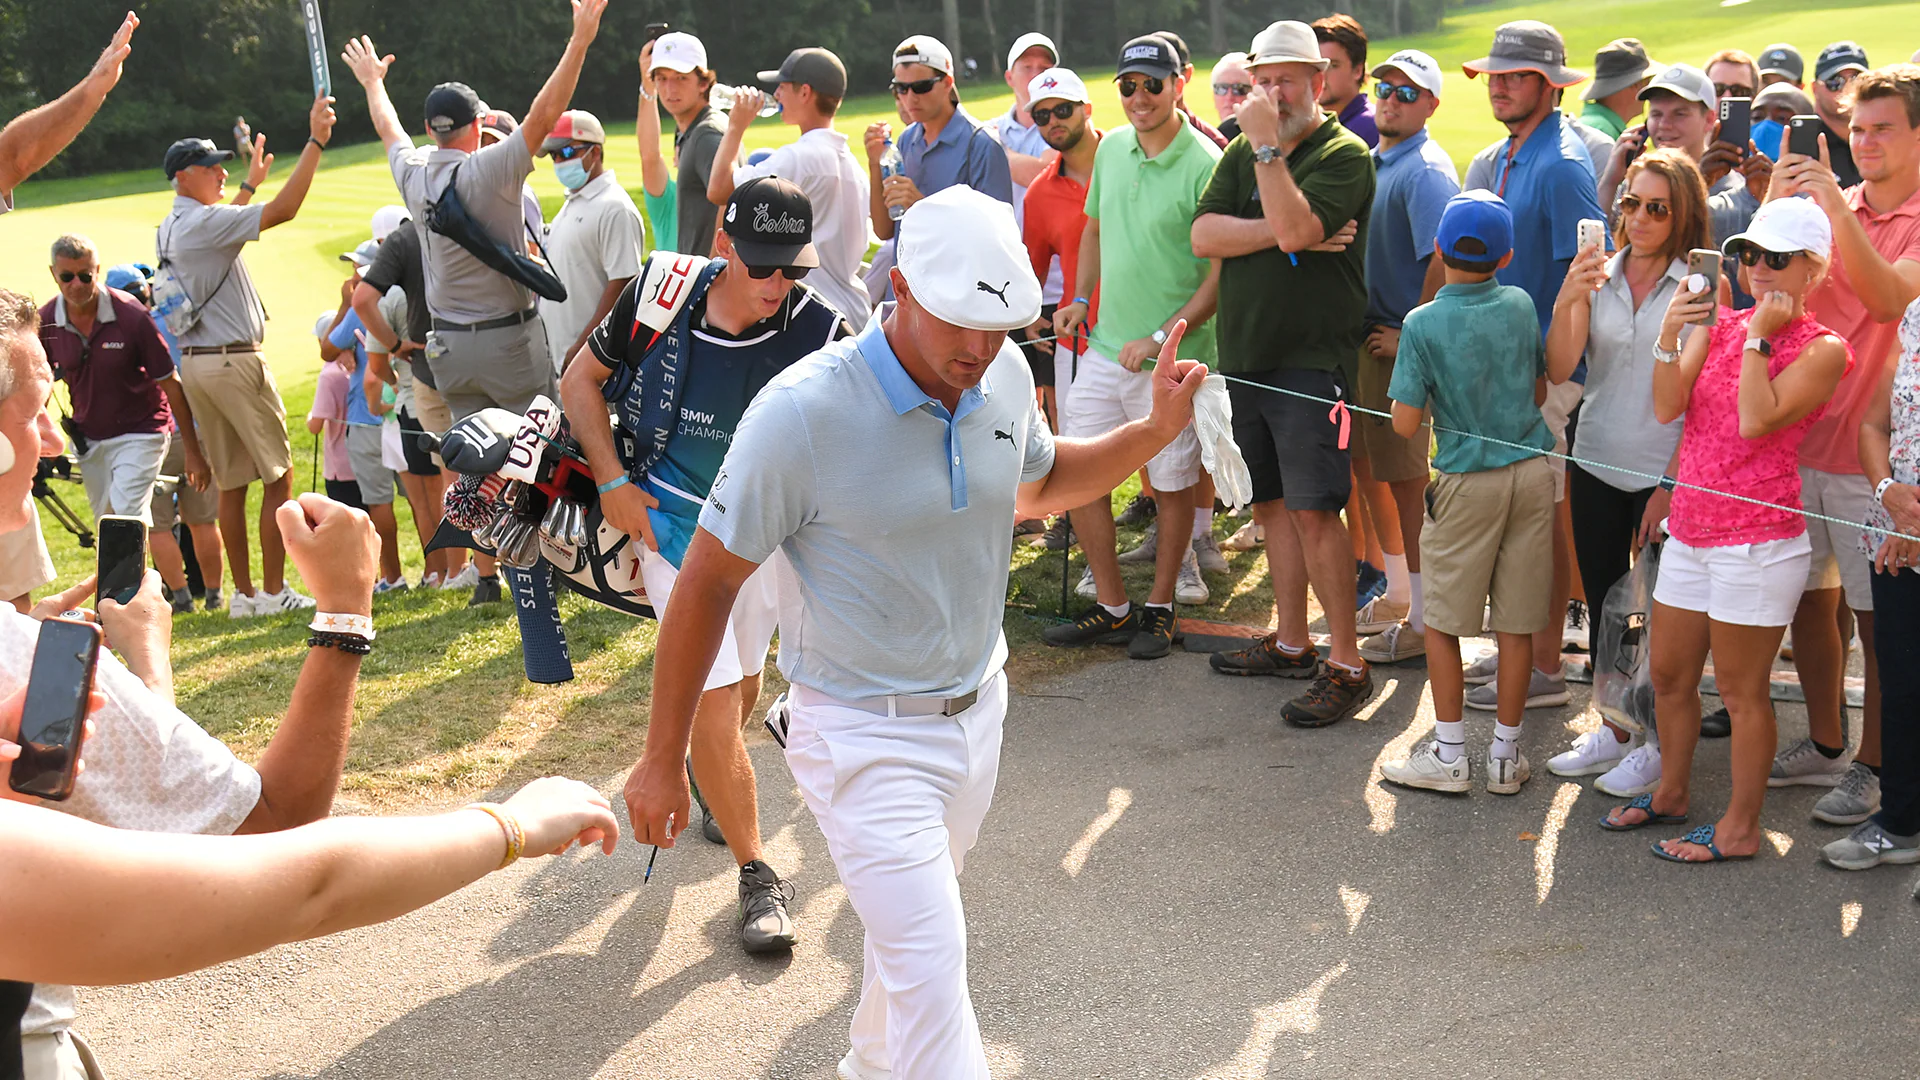 Harry Higgs rooting for Bryson DeChambeau at BMW, calls ongoing heckling ‘wildly inappropriate’